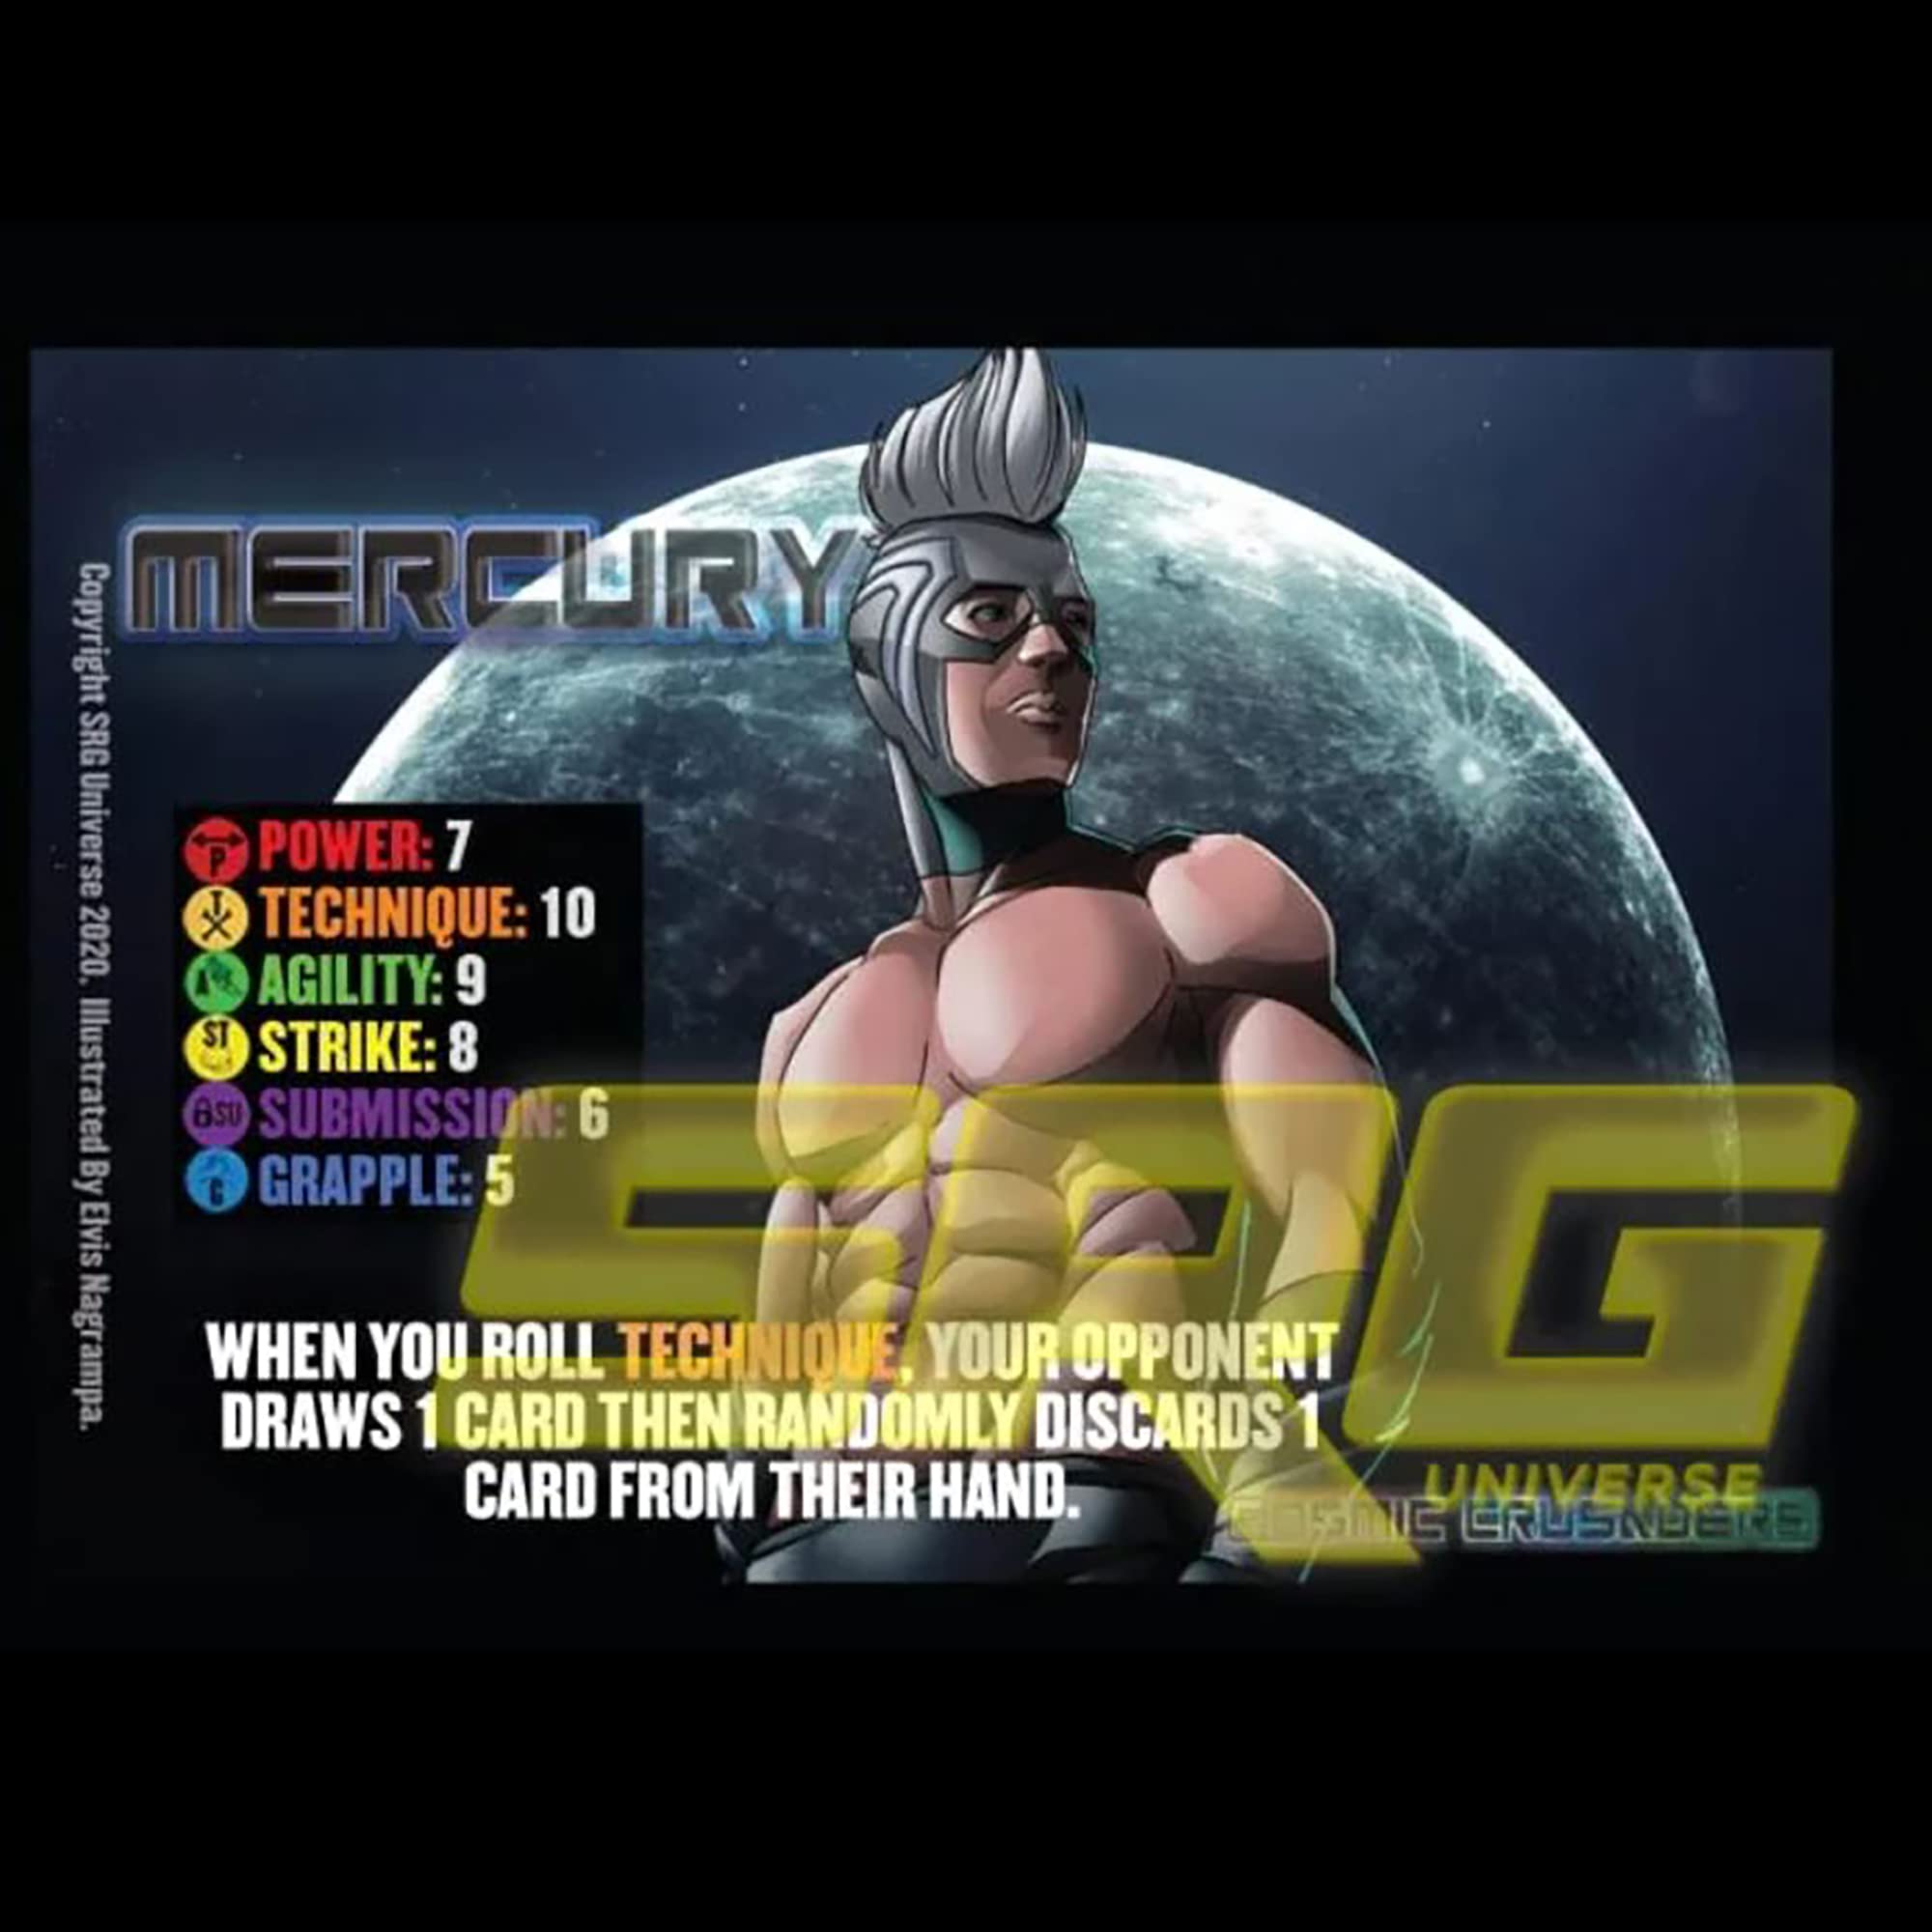 GTS Distribution   Supershow Cosmic Crusader: Mercury - Wrestling Card and Dice Game. SRG Structure Deck. Ages 12+, 2-6 Players, 10 Min Game Play (SRG41200)